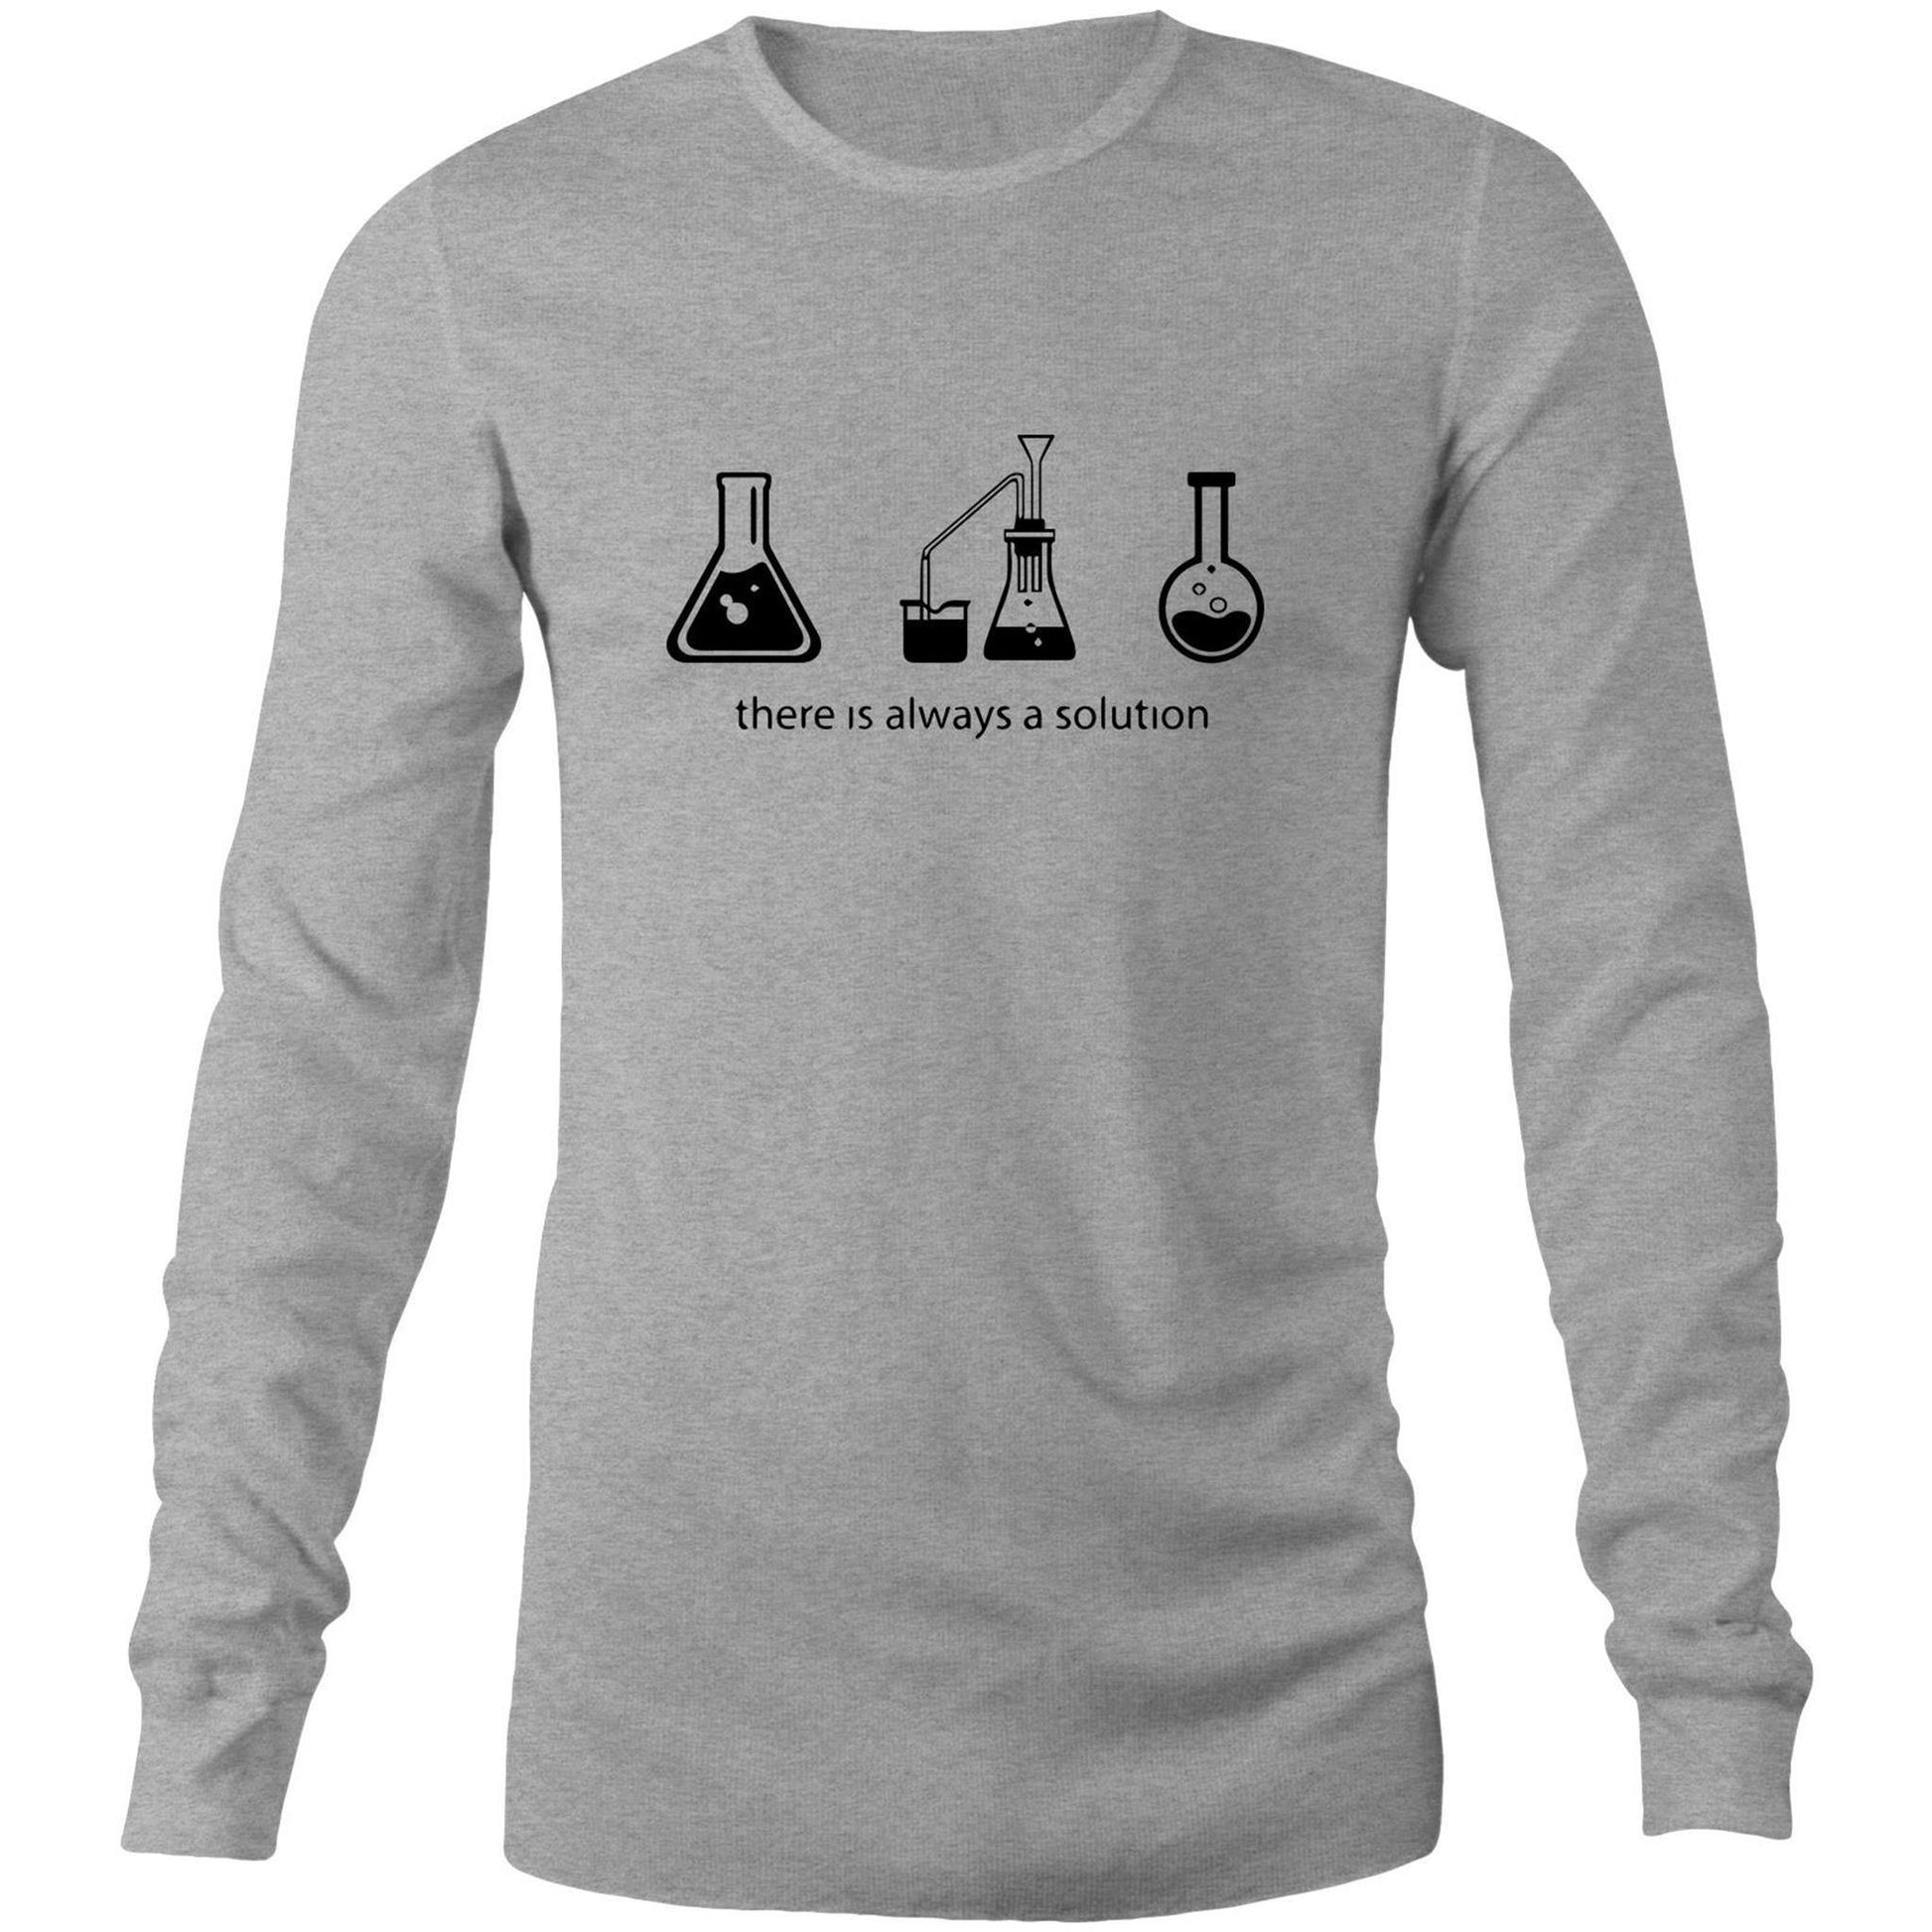 There Is Always A Solution - Long Sleeve T-Shirt Grey Marle Unisex Long Sleeve T-shirt Mens Science Womens